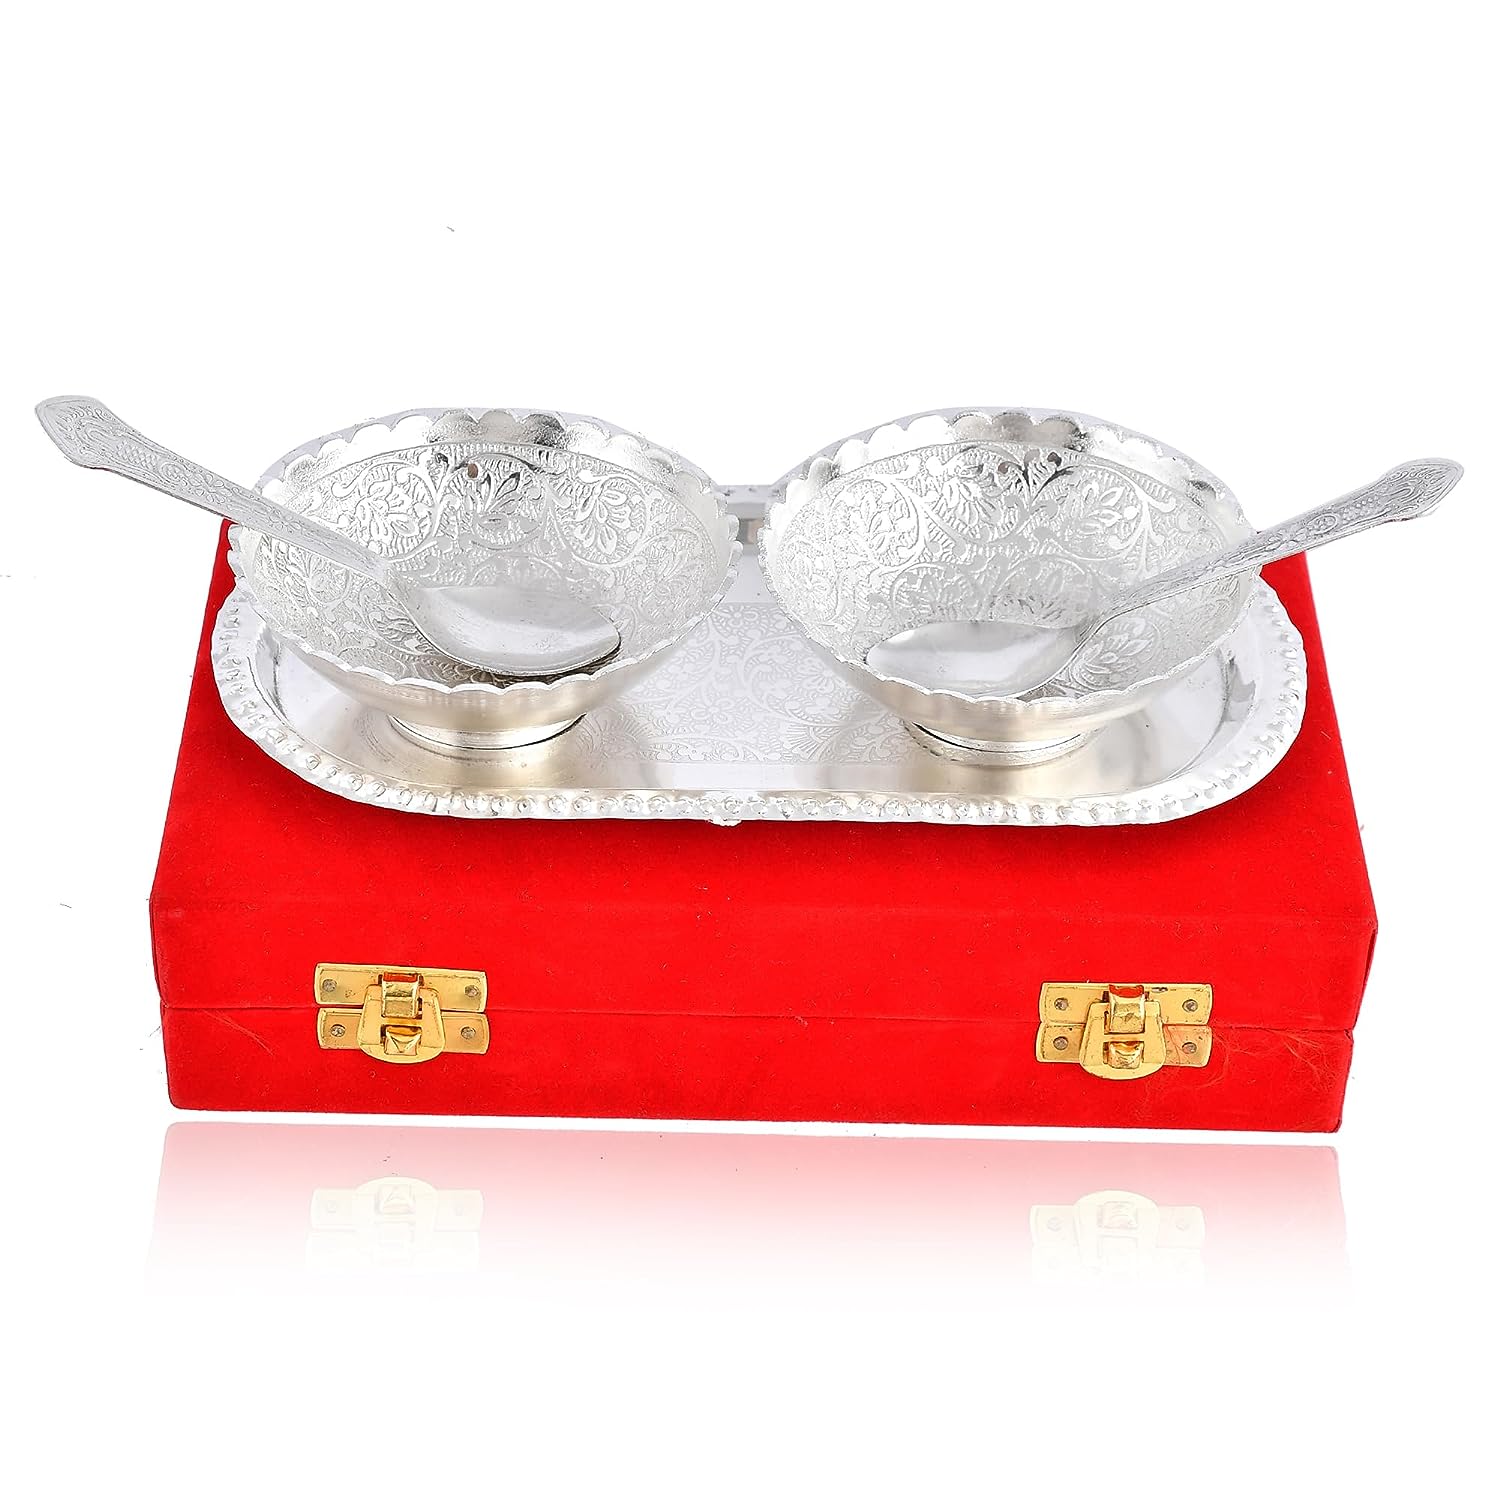 BENGALEN Silver Plated Bowl Spoon Tray Set Dessert Dry Fruits Serving Diwali Christmas Eid Wedding Return Gifts Friends Family Home Decoration Housewarming Corporate Gift Items (Gold Plated)